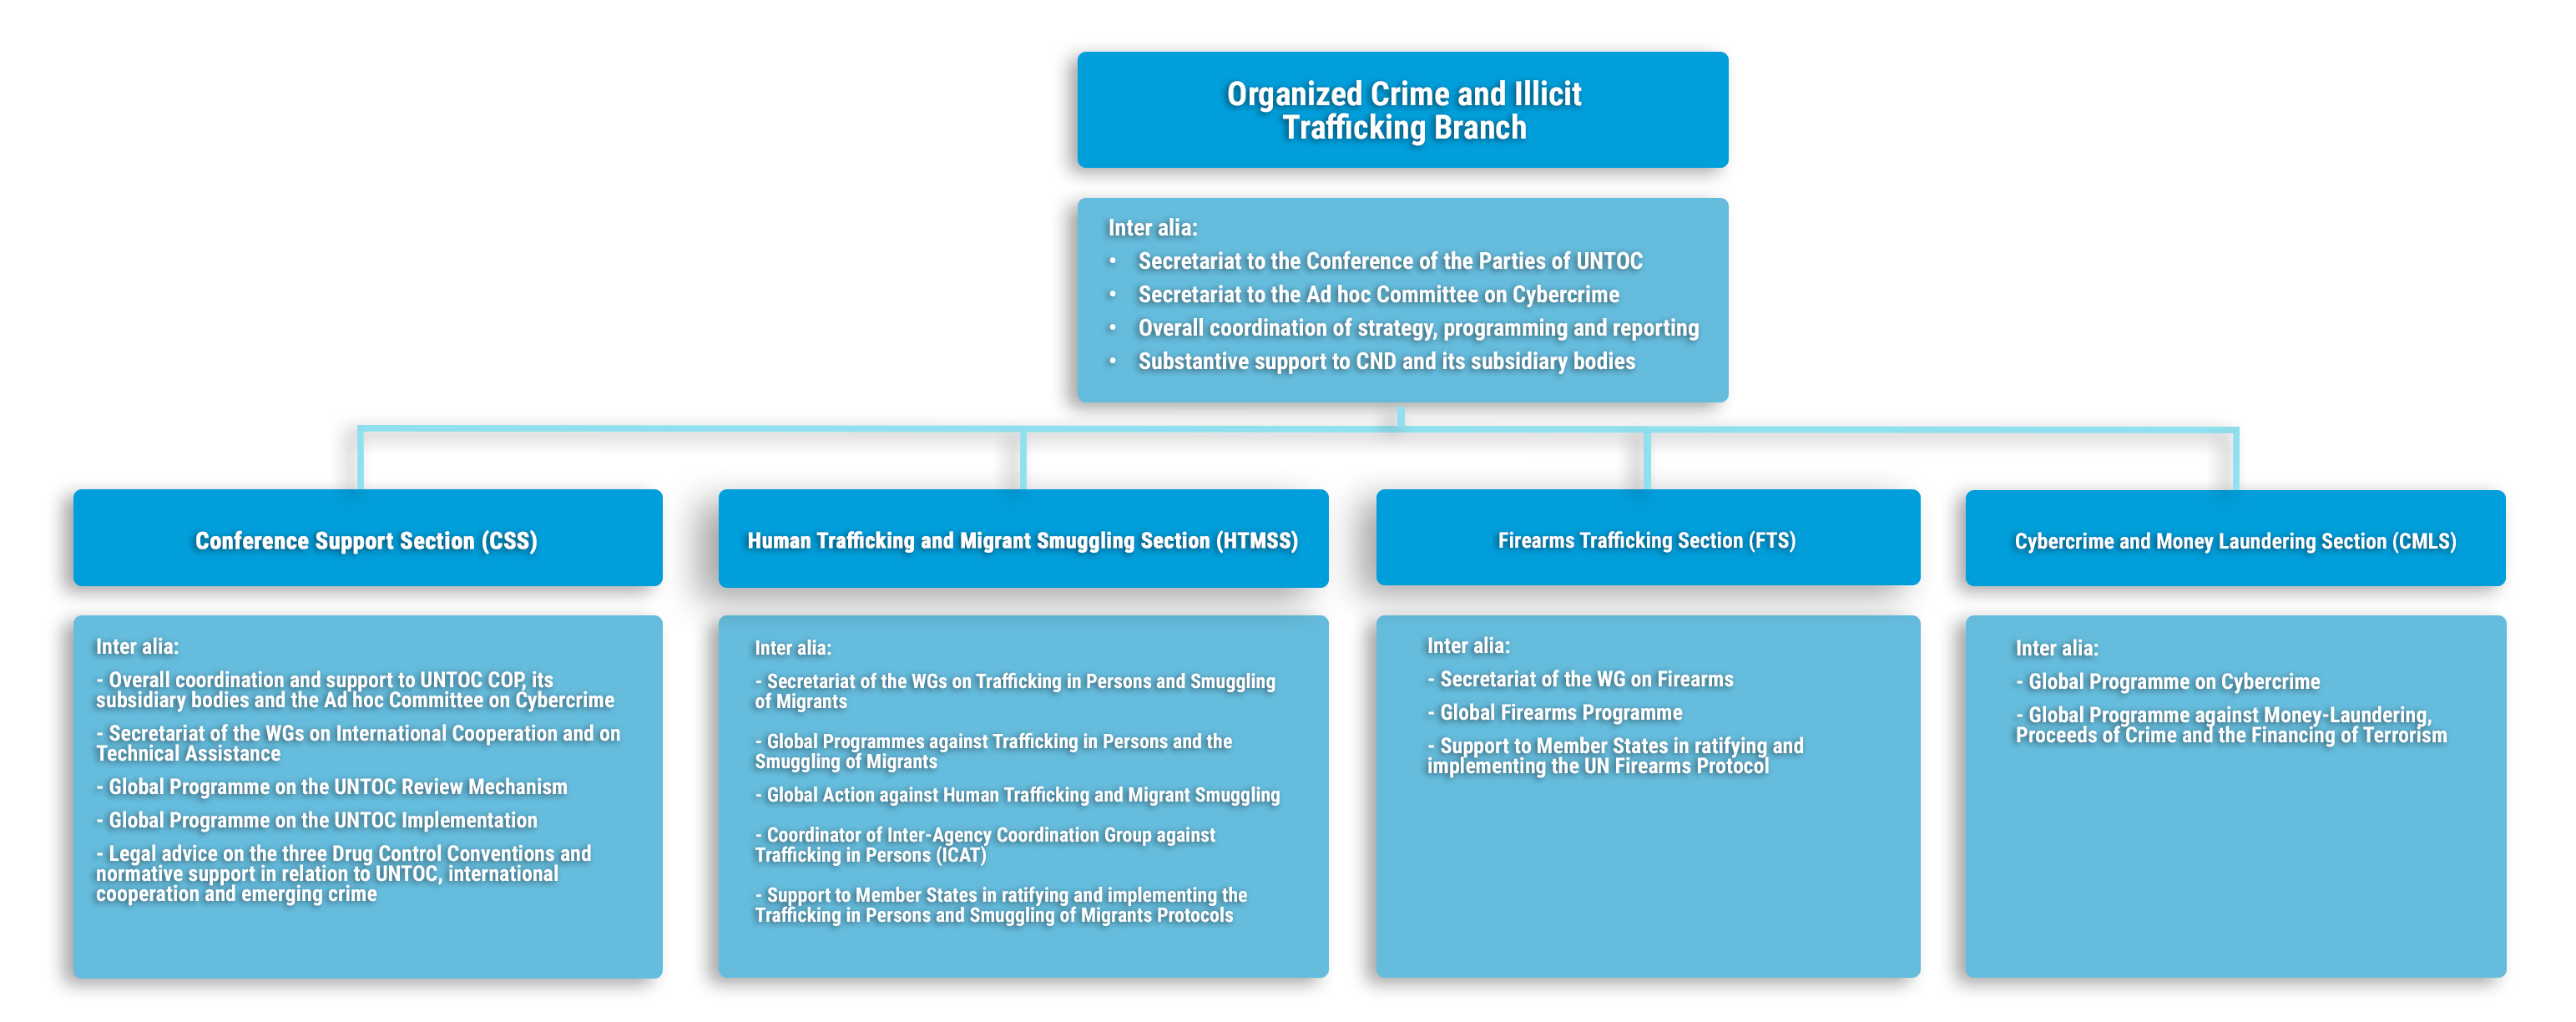 An organizational chart with one main section "Organized Crime and Illicit Trafficking Branch" and four sections below for the respective sections (Conference Support Section, Human Trafficking and Migrant Smuggling Section, Firearms Trafficking Section, and Cybercrime and Money Laundering Section).